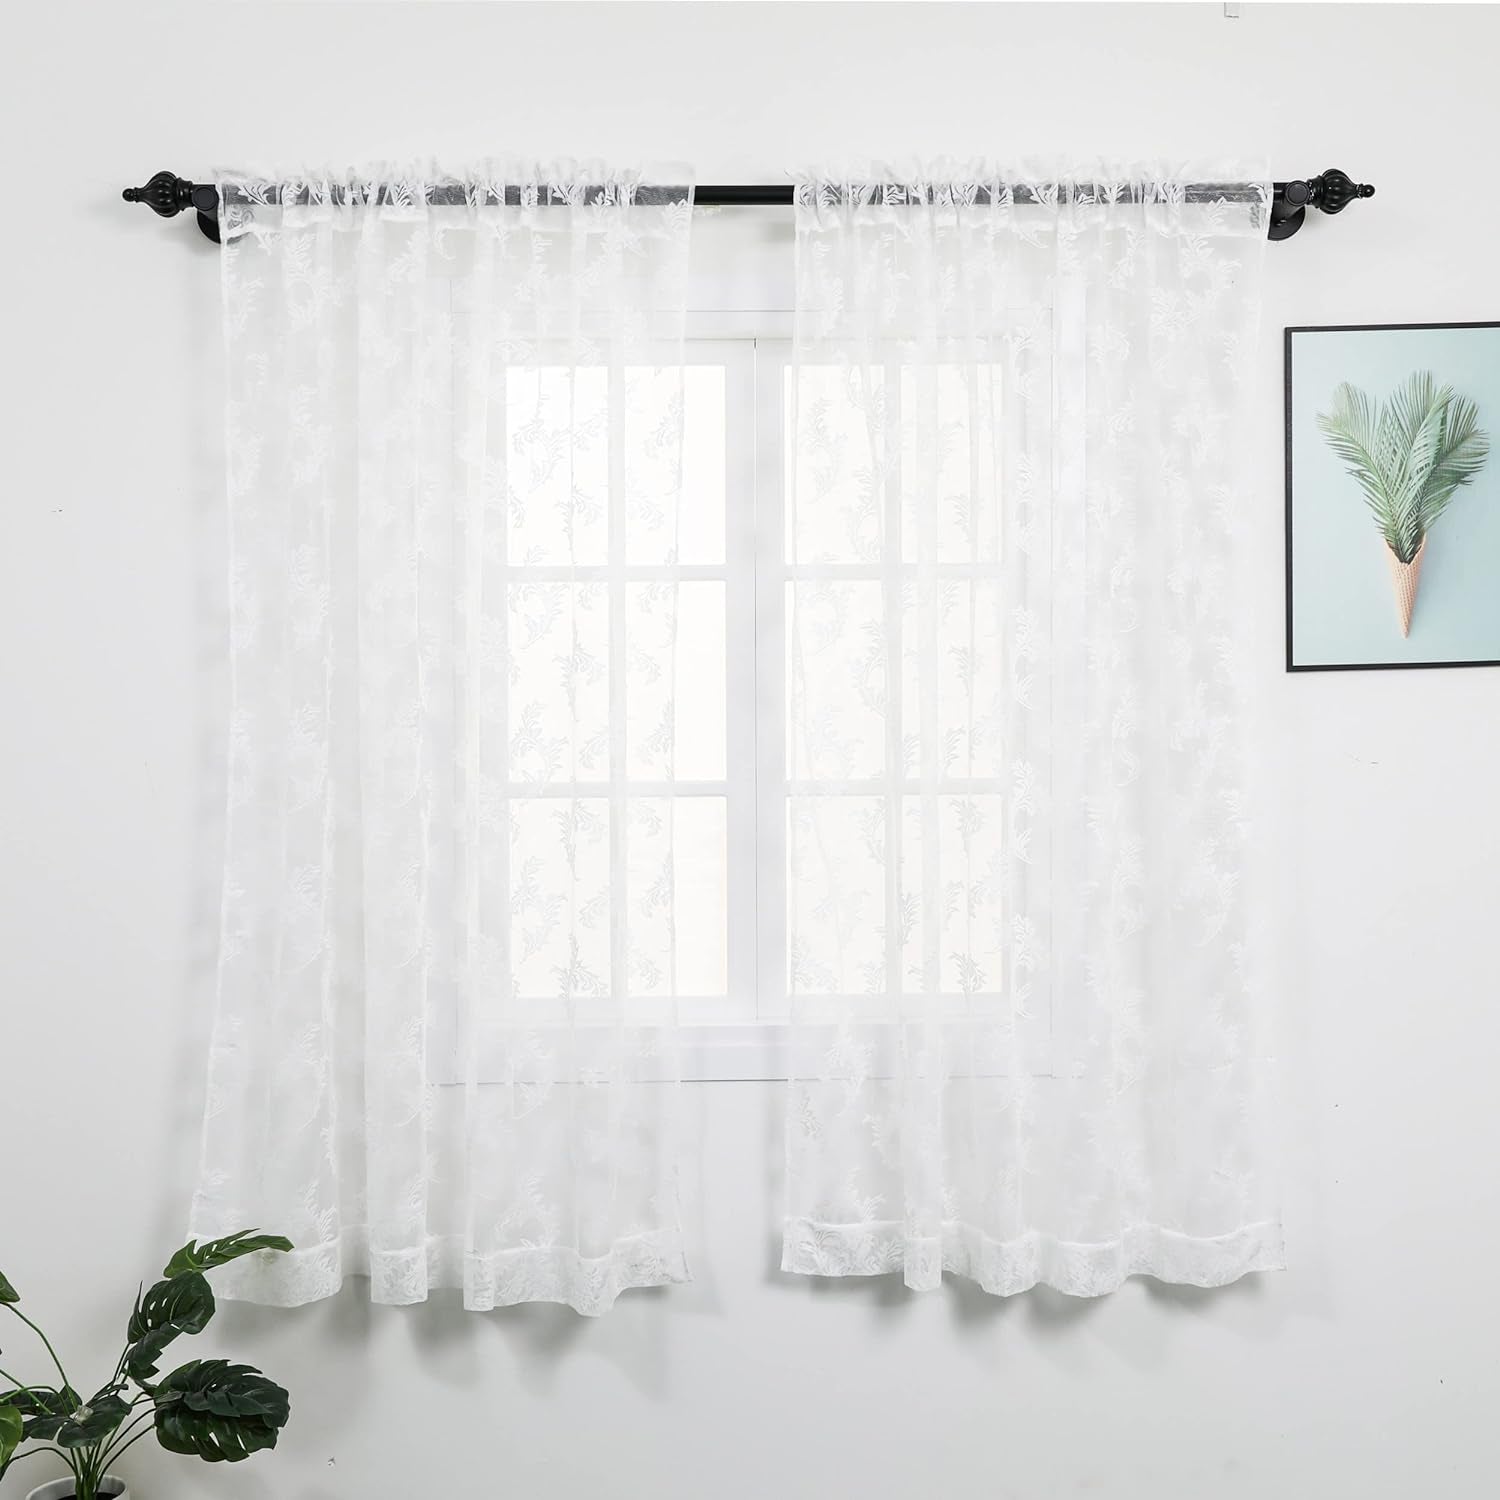 Rloncomix White Sheer Curtains Decorative Leaves Knitted Textured Rod Pocket Semi Light Filtering Airy Window Drapes for Bedroom Kitchen, 52 X 63 Inch, 2 Panels  BAIHT HOME   